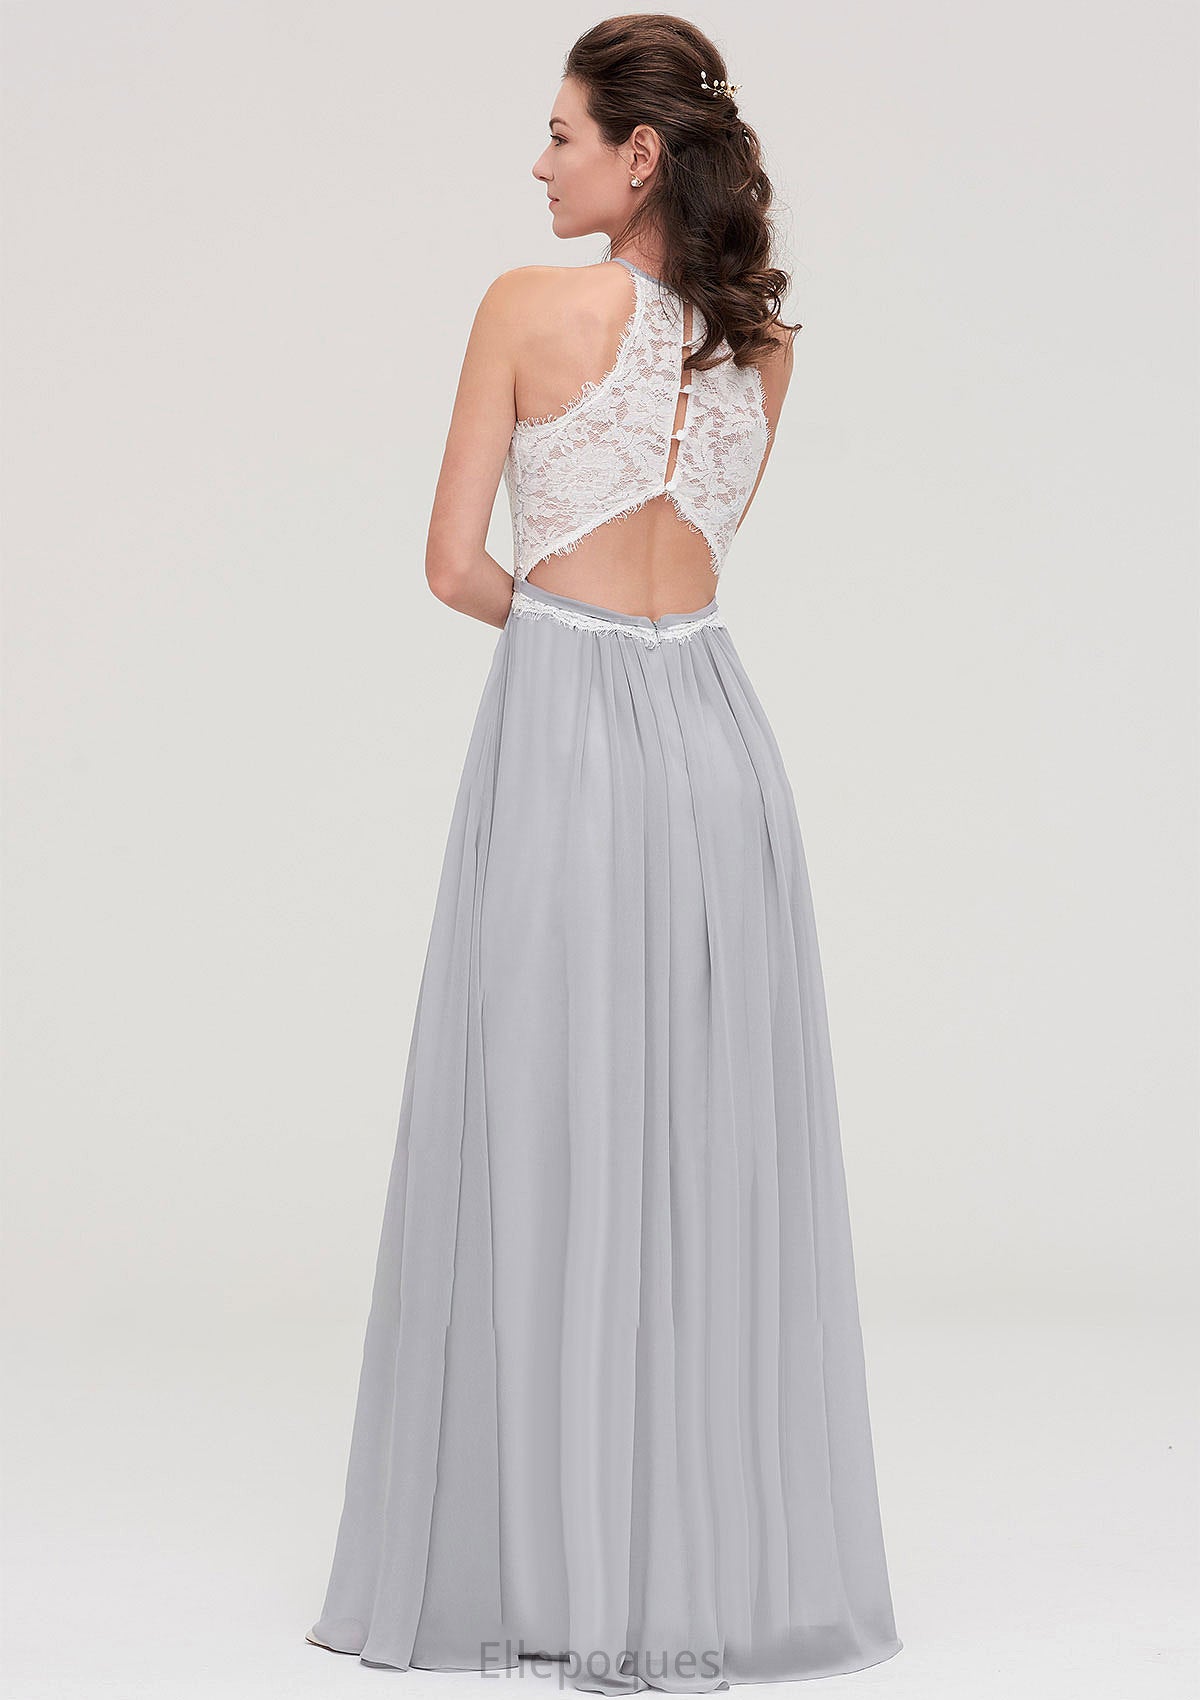 Sleeveless Scoop Neck A-line/Princess Chiffon Long/Floor-Length Bridesmaid Dresseses With Lace Kelsie HOP0025497